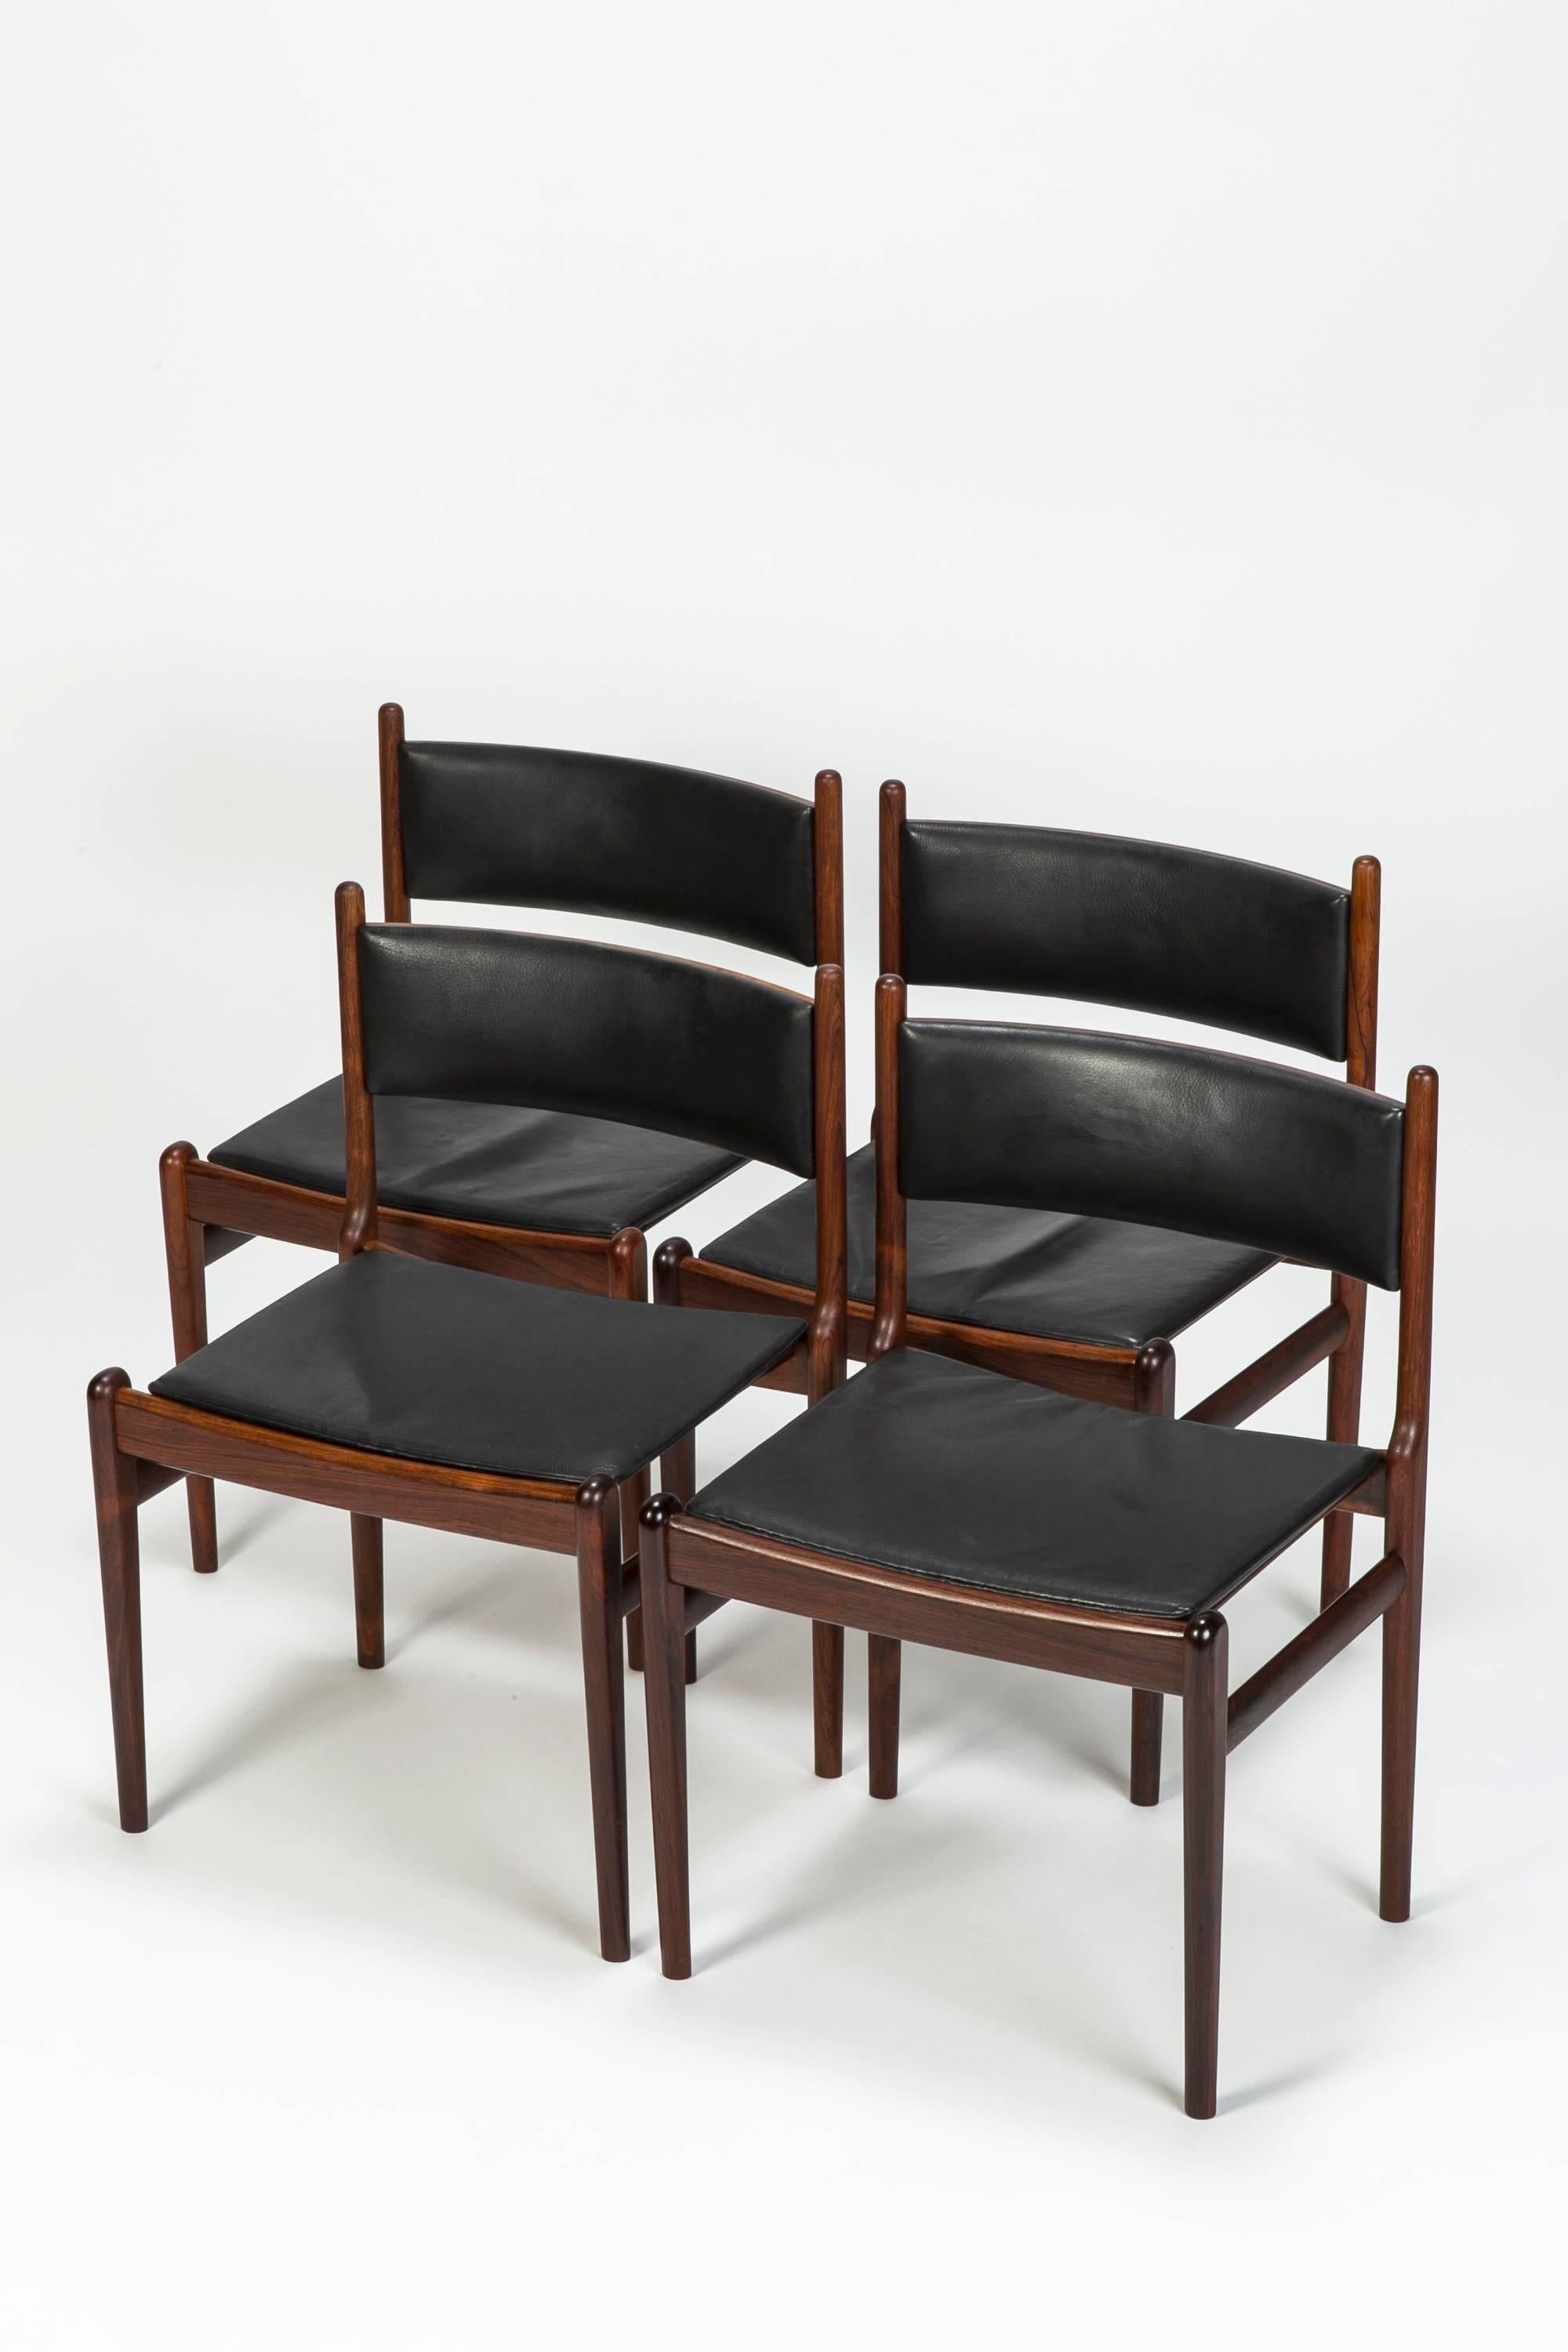 Set of six wonderful and extremely rare Nanna Ditzel dining chairs, manufactured by the renowned cabinetmaker Søren Willadsen in Denmark in the 1960s. Two chairs are with armrests and four without. Organically shaped frame with stunning details, the